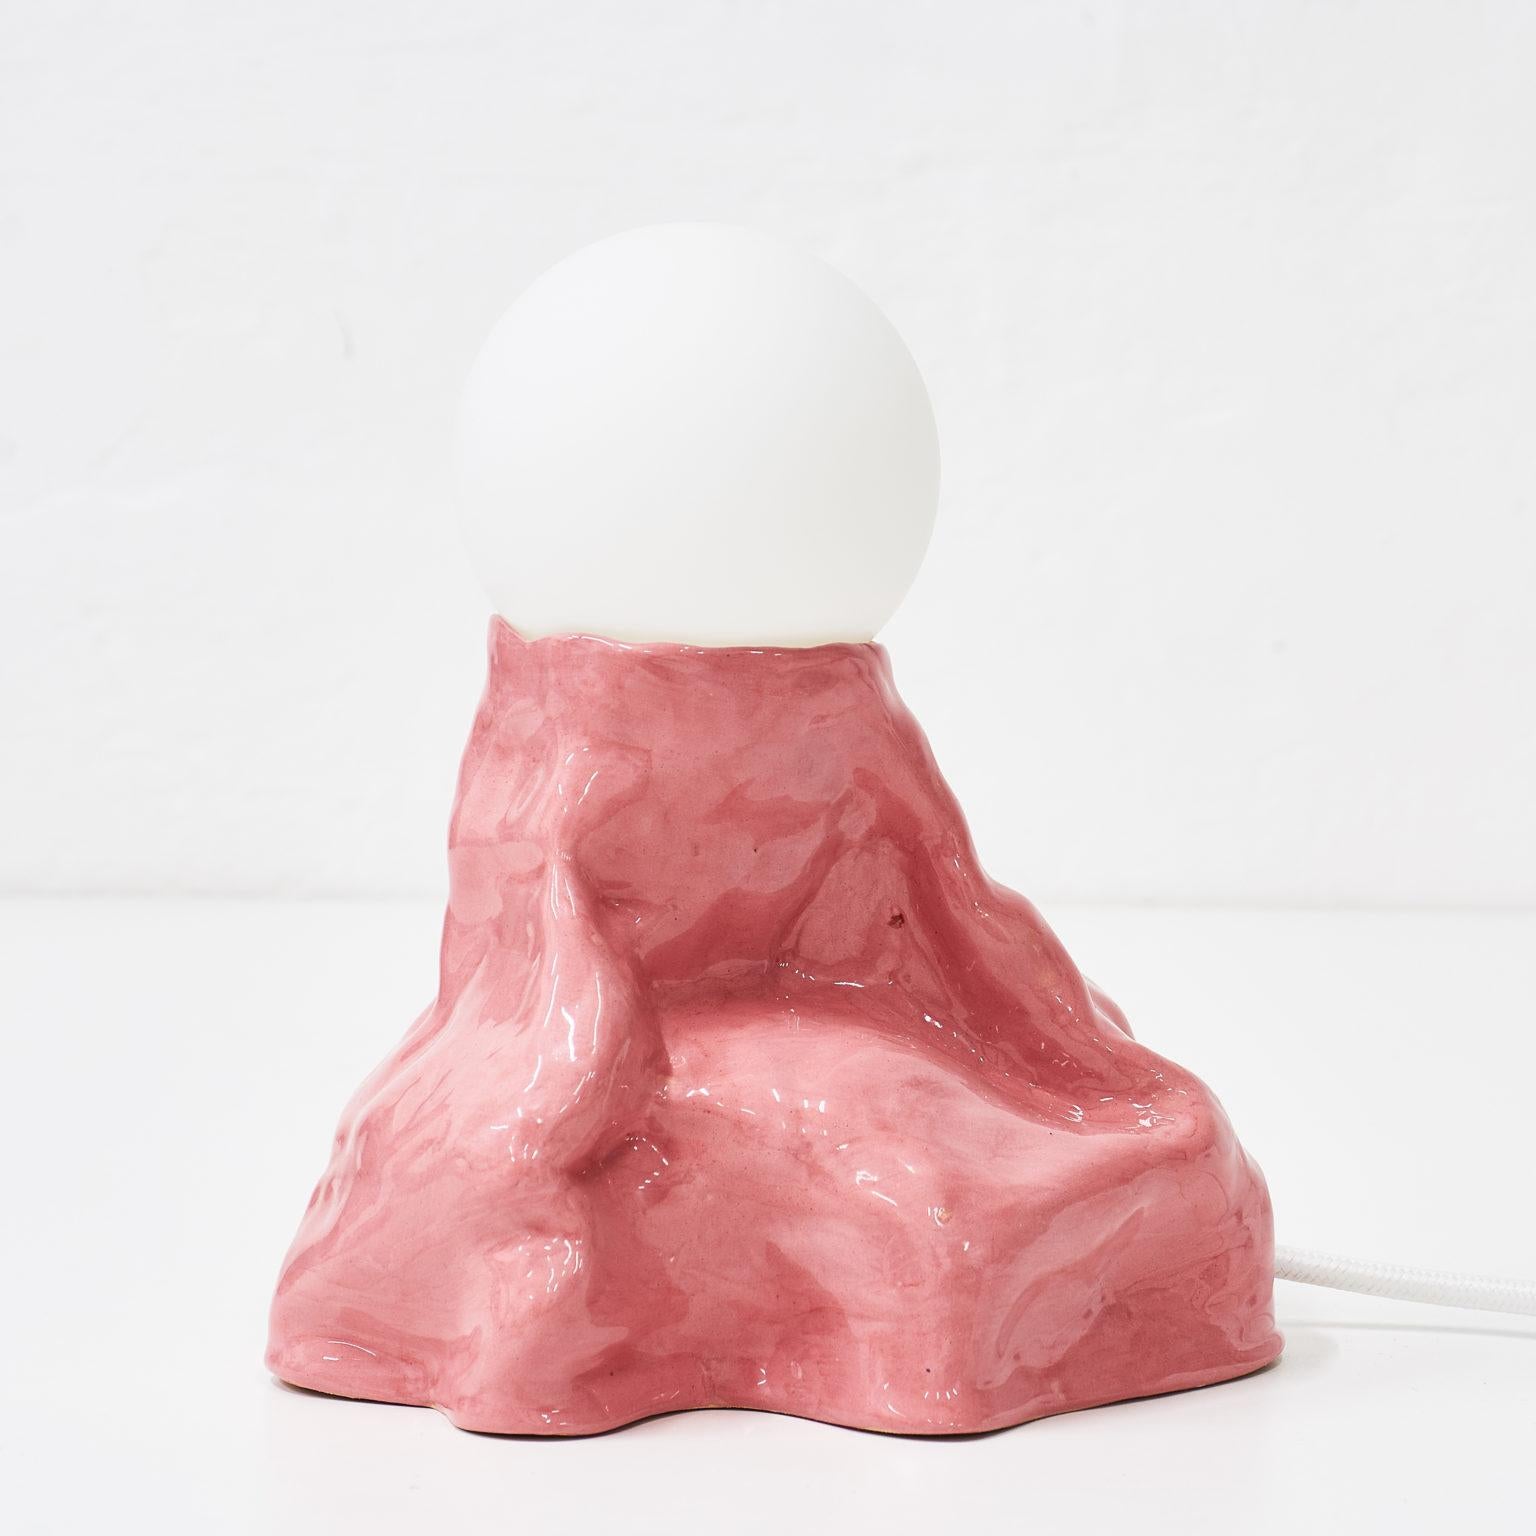 Pink Moutain Lamp by Siup Studio
Dimensions: D10 x W14 x H19 cm
Materials: glass and ceramics.

All our lamps can be wired according to each country. If sold to the USA it will be wired for the USA for instance.

Siup is a small design studio